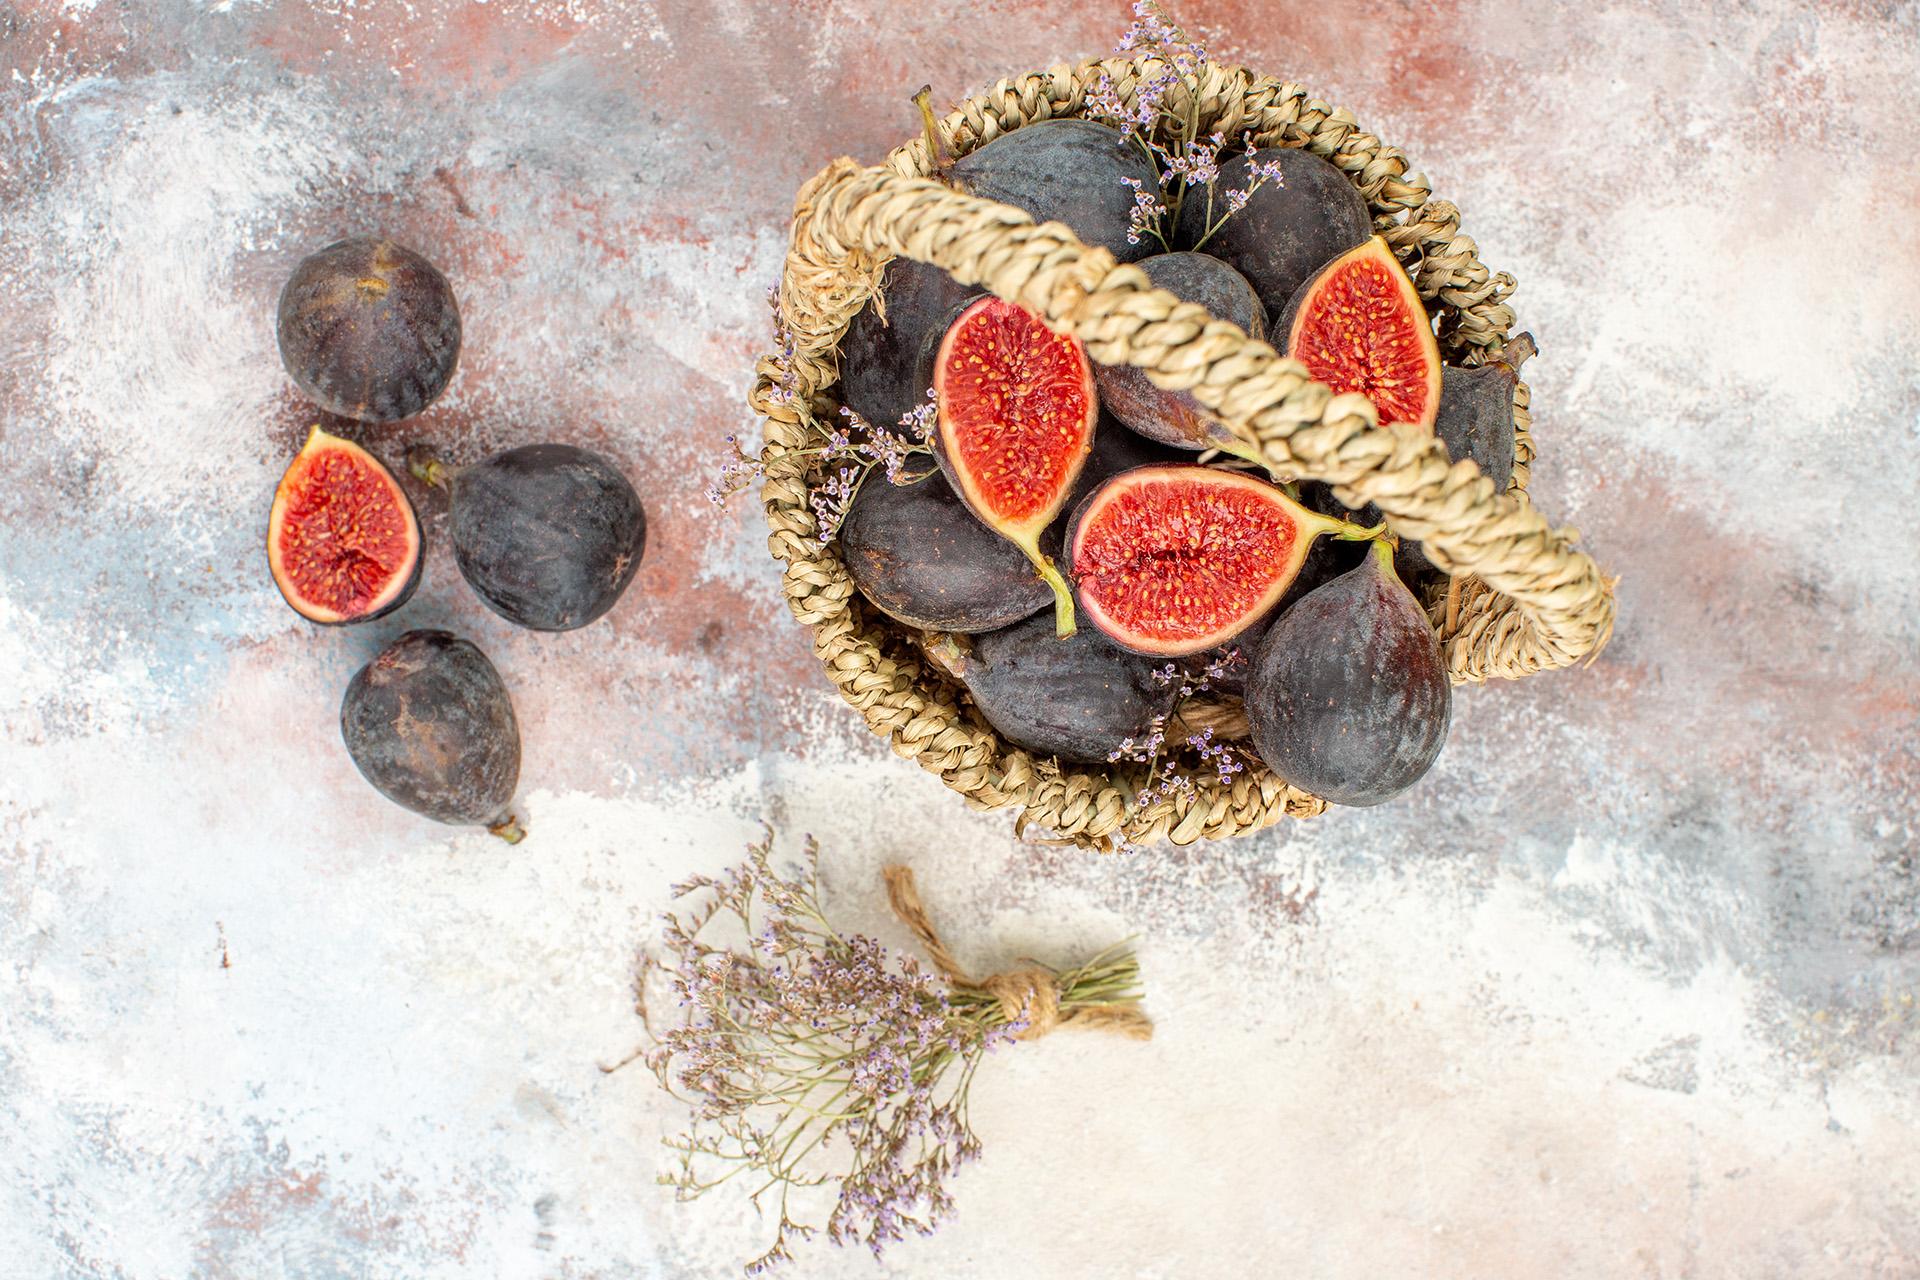 8 Top Winter Season Fruits You Should Definitely Include In Your Diet